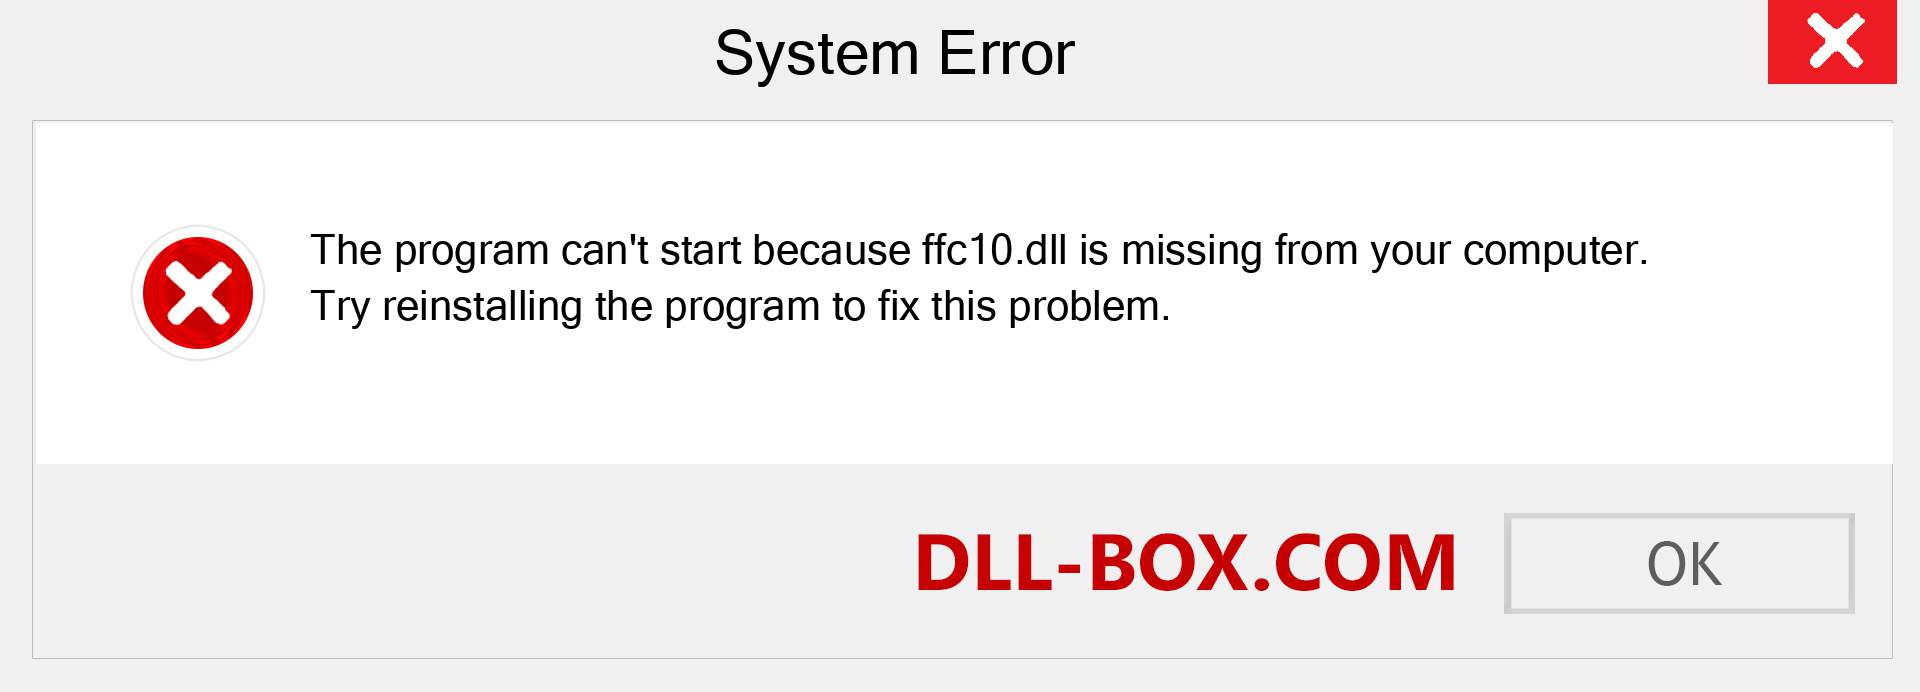  ffc10.dll file is missing?. Download for Windows 7, 8, 10 - Fix  ffc10 dll Missing Error on Windows, photos, images